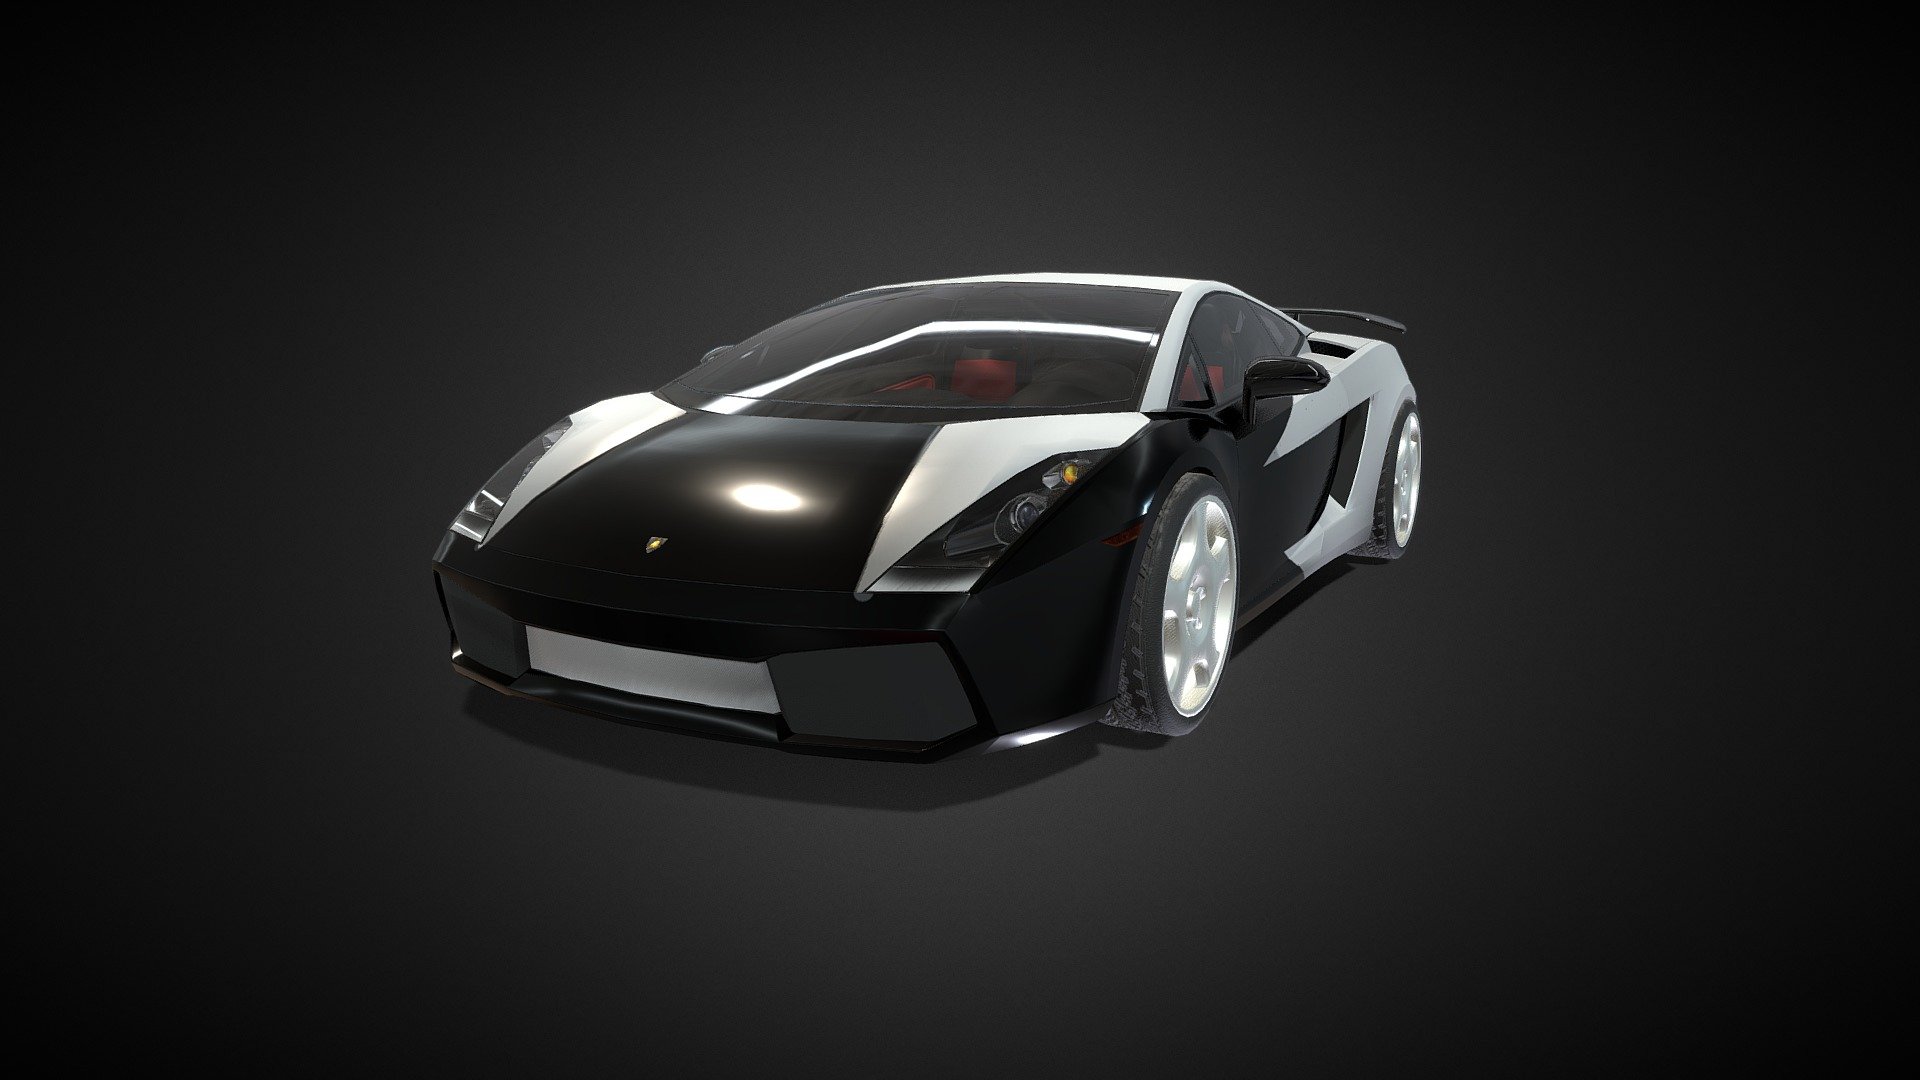 As a tribute and personal proyect I`m working on all NFS Most Wanted original blacklist cars. Hope you enjoy them!

You can see more about this project on https://www.artstation.com/m3dov 
Also you can follow my insta https://www.instagram.com/3dov_mxn/ - Lamborghini Gallardo NFSMW - Download Free 3D model by memoov (@movartD) 3d model